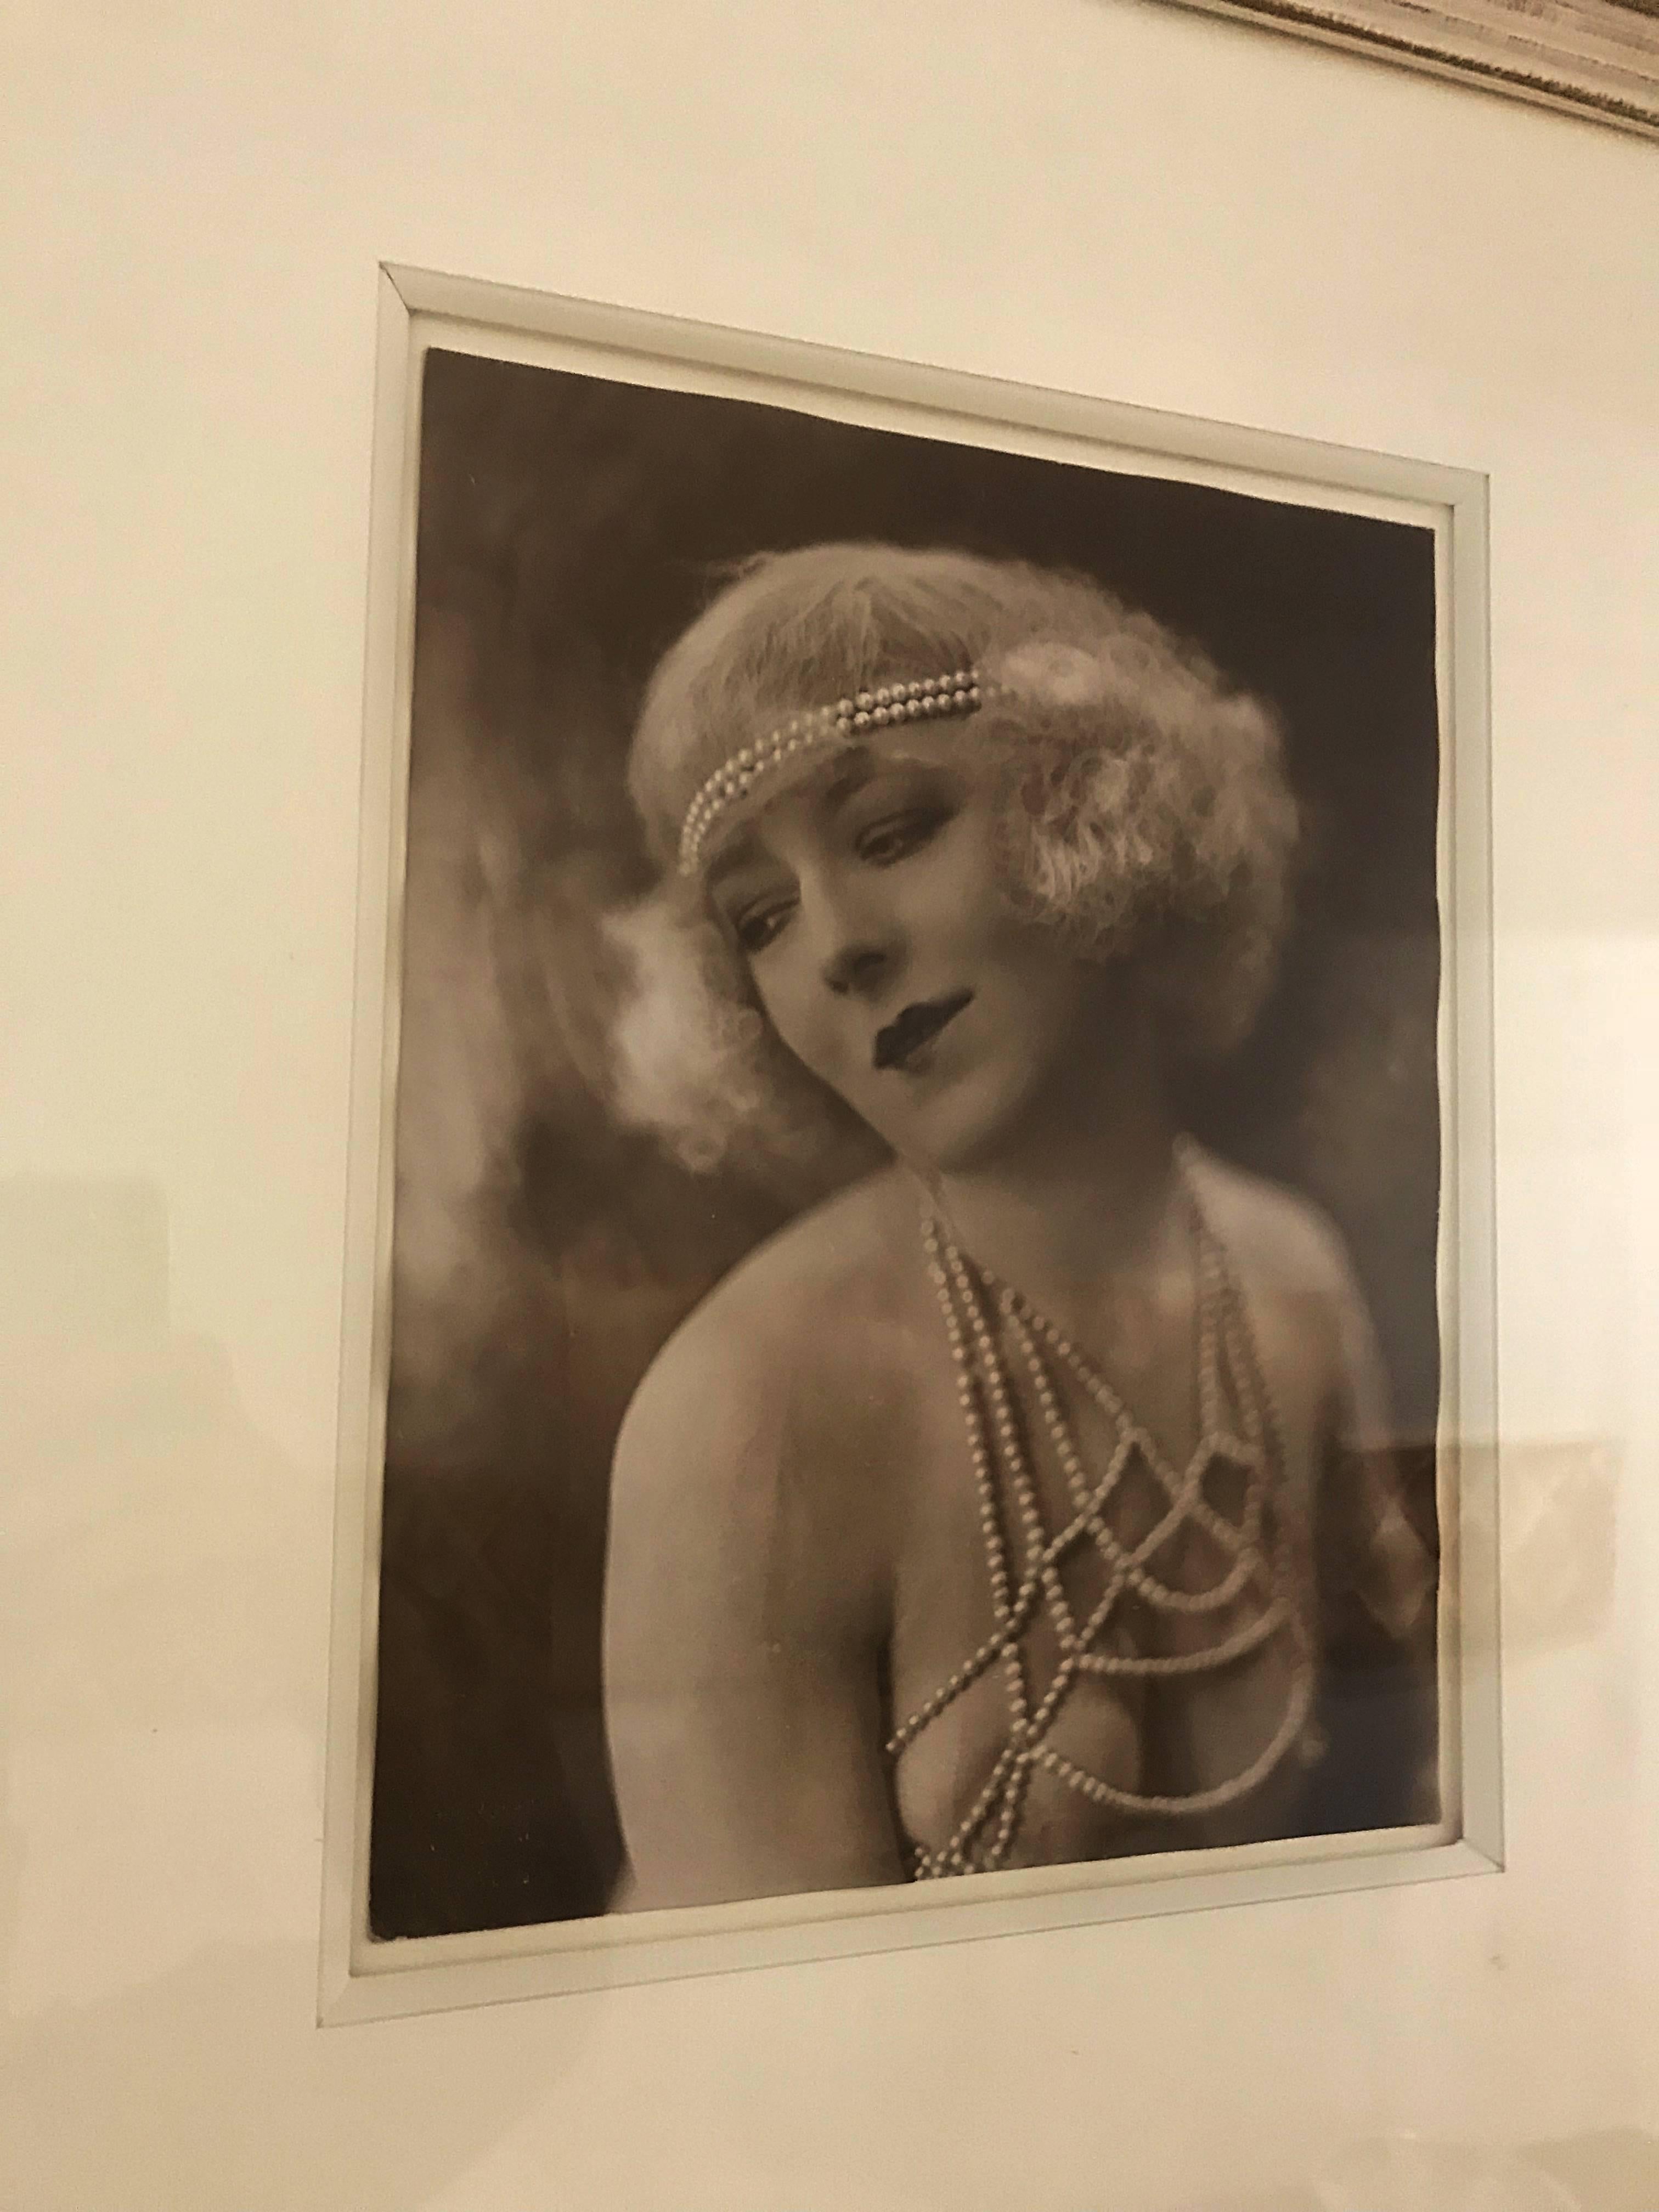 Ernst Schneider was one of the most acclaimed studio photographers of Berlin during the 1910s, 1920s and 1930s. Many celebrities from the theatre, the opera, the circus, and later the cinema came to his studio. Schneider also belonged to the